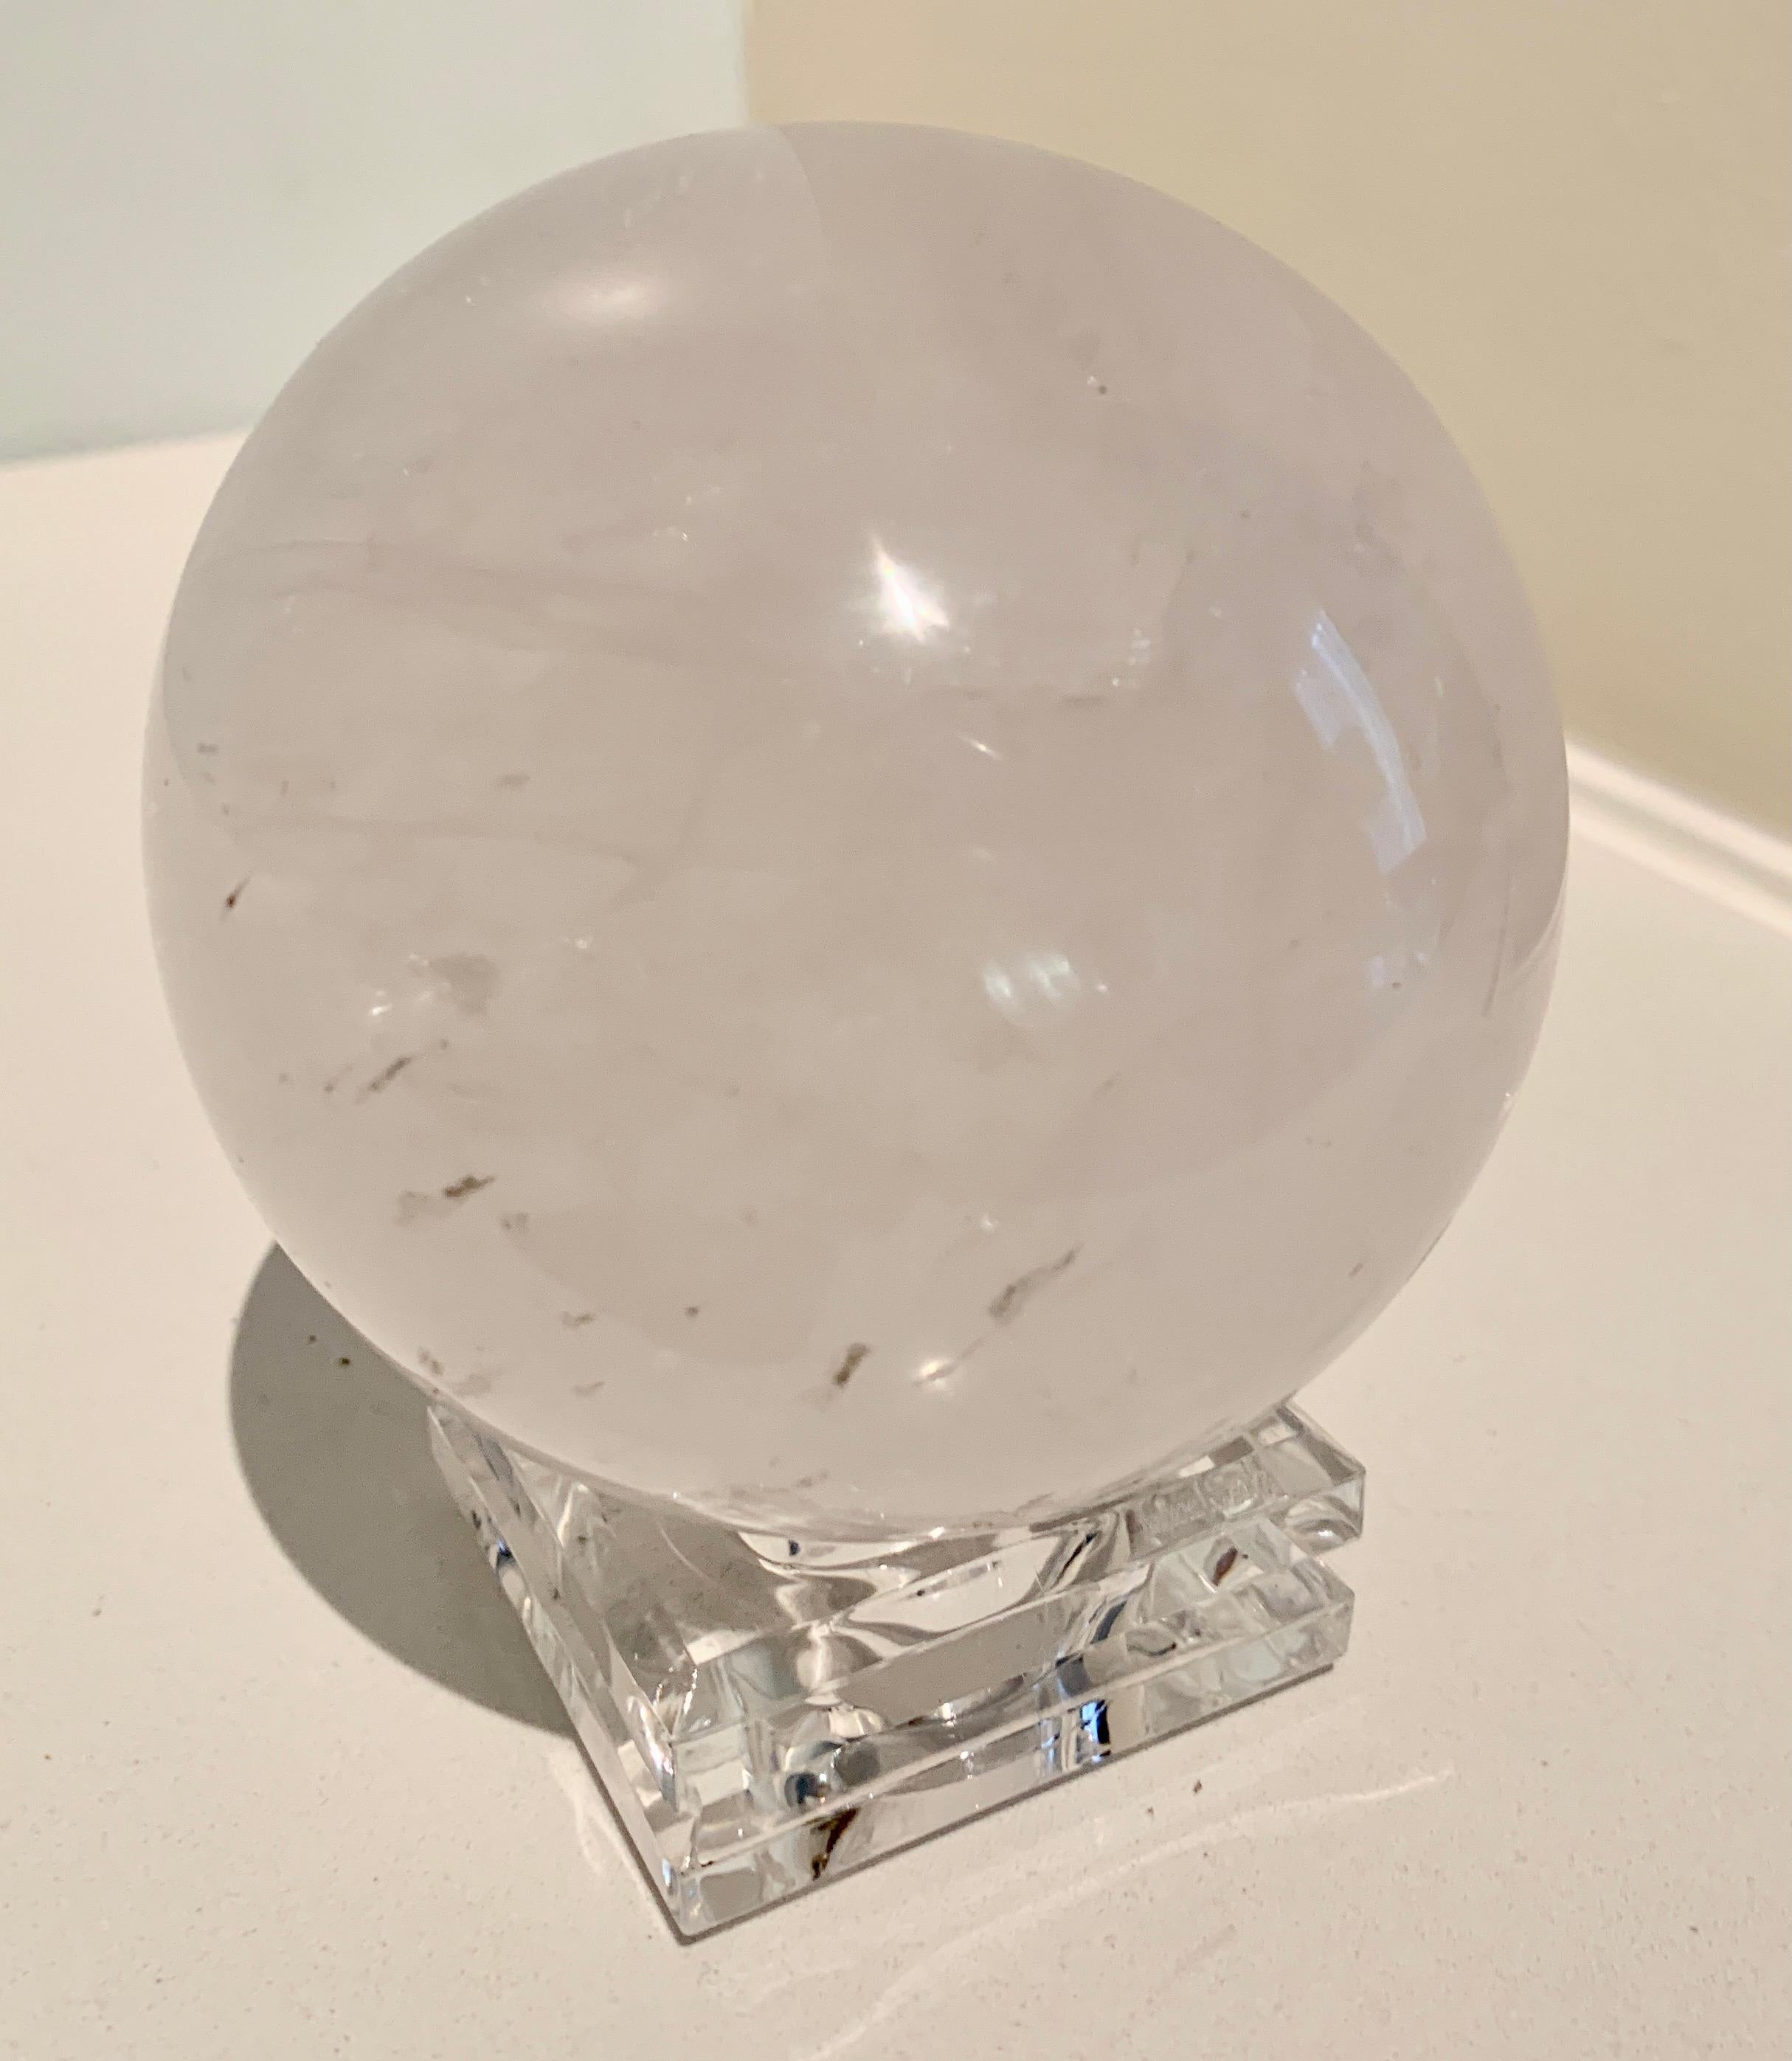 Rock crystal ball on stand - a lovely rock crystal specimen on an acrylic base, which also looks to be cut crystal. A compliment to any desk or shelf. Use as a paper weight or sculpture.